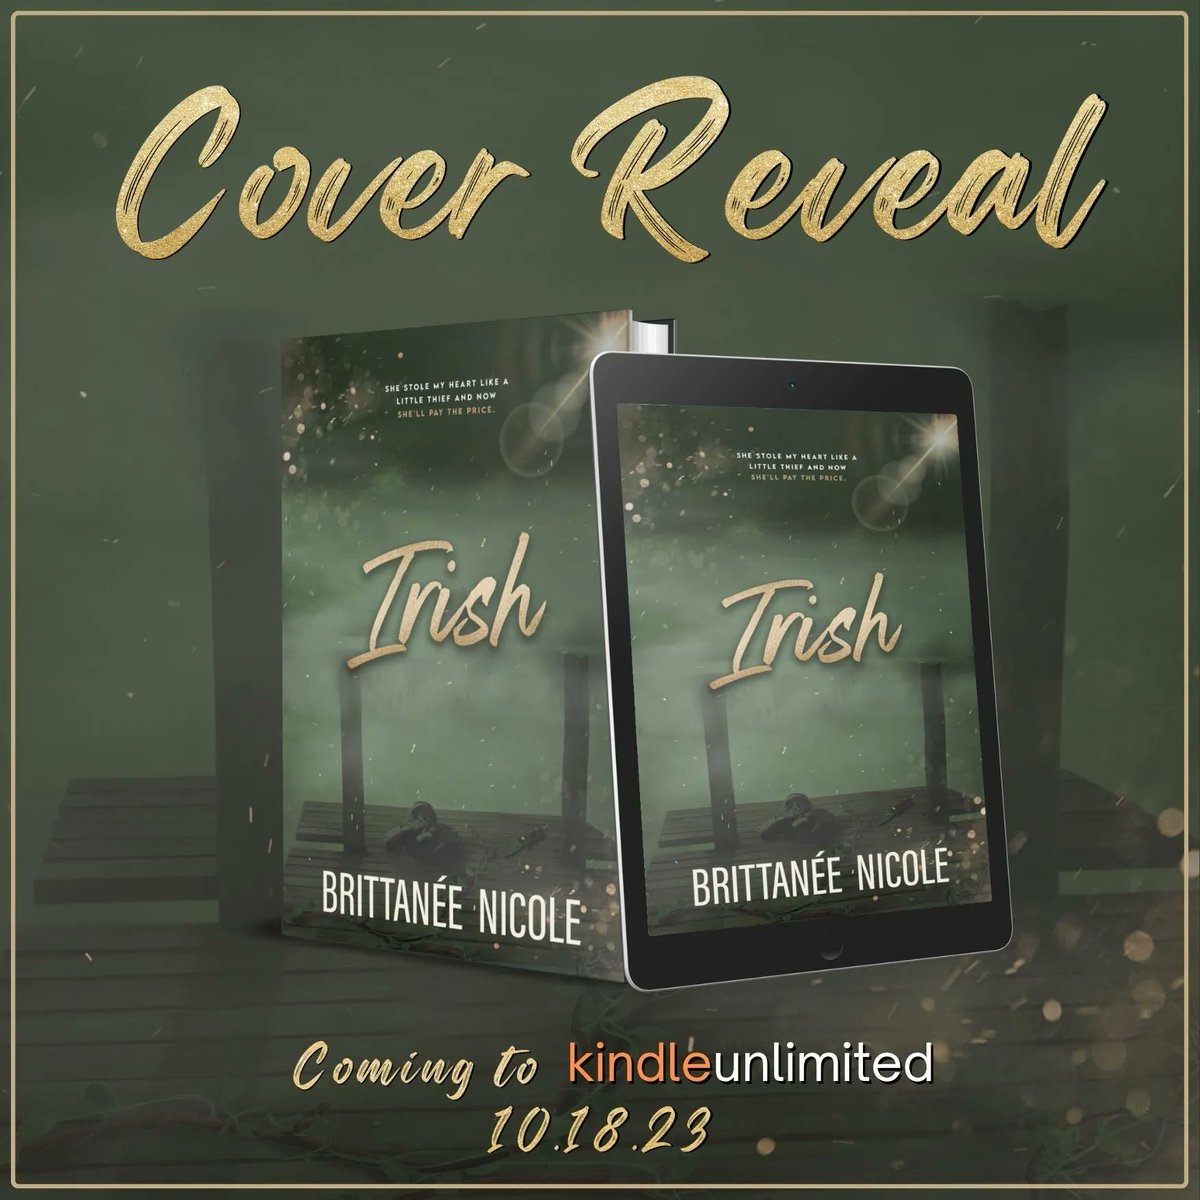 ✨Coming Soon
IRISH by Brittanée Nicole releasing 10/18!
#PreOrderHere
buff.ly/45OOkFU
#bookish #theauthoragency